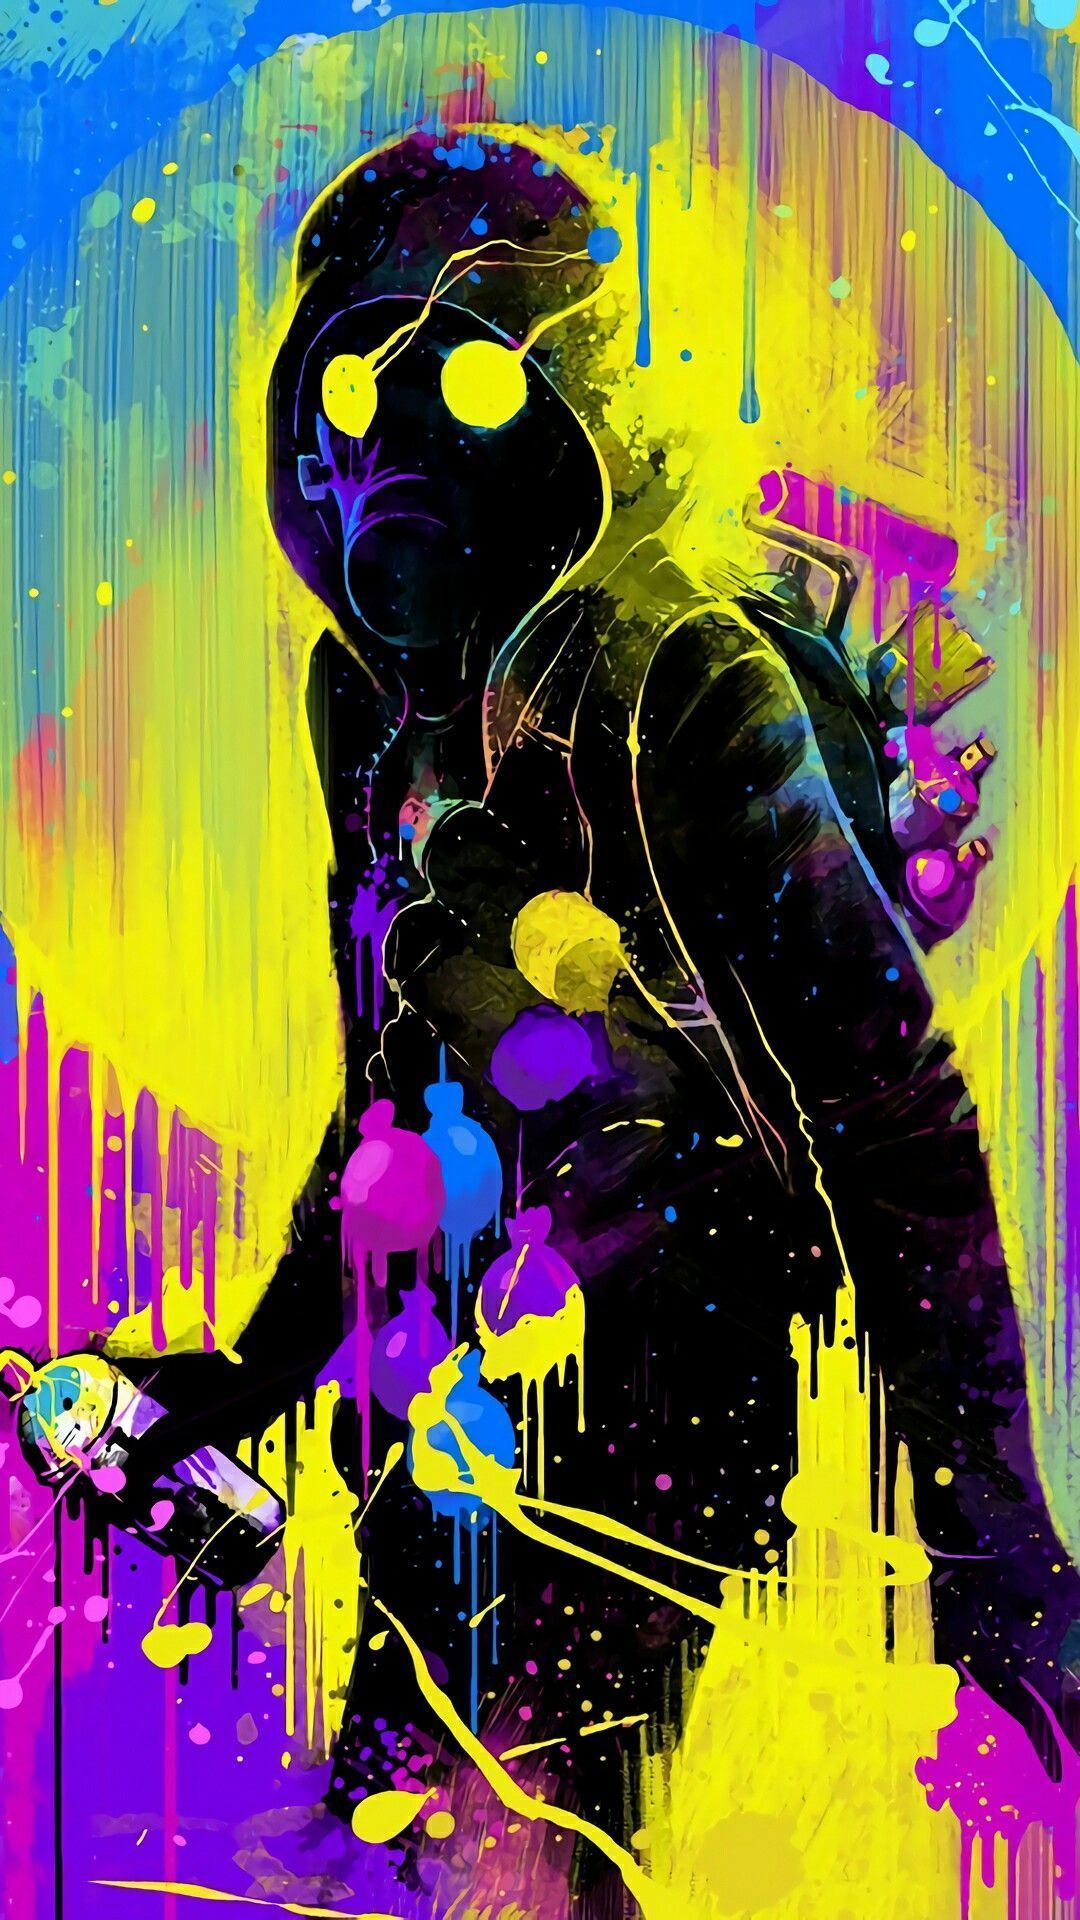 A man in black and yellow with paint splattered all over him - Graffiti